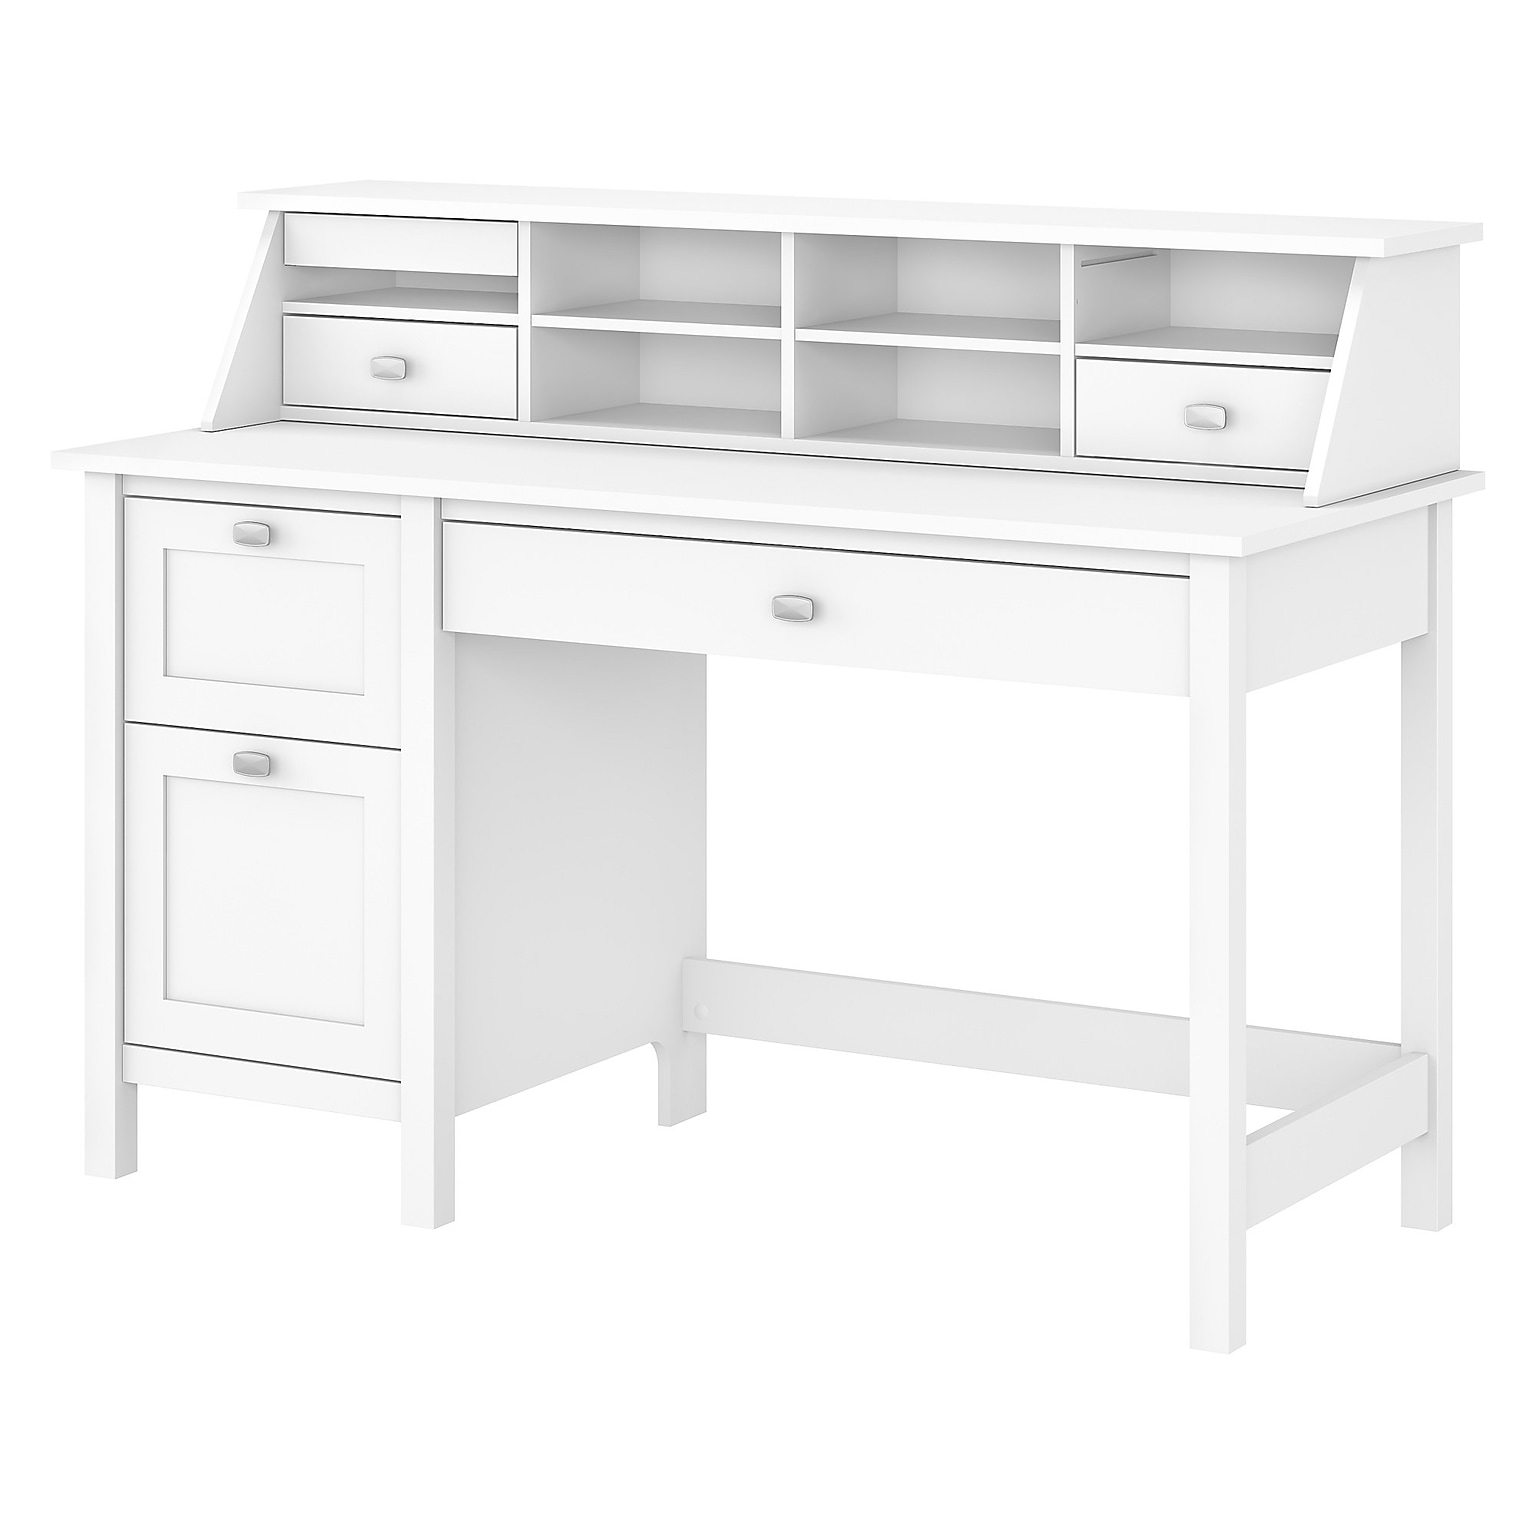 Bush Furniture Broadview 54 W Computer Desk with 2 Drawer Pedestal and Organizer Bundle, Pure White (BD005WH)